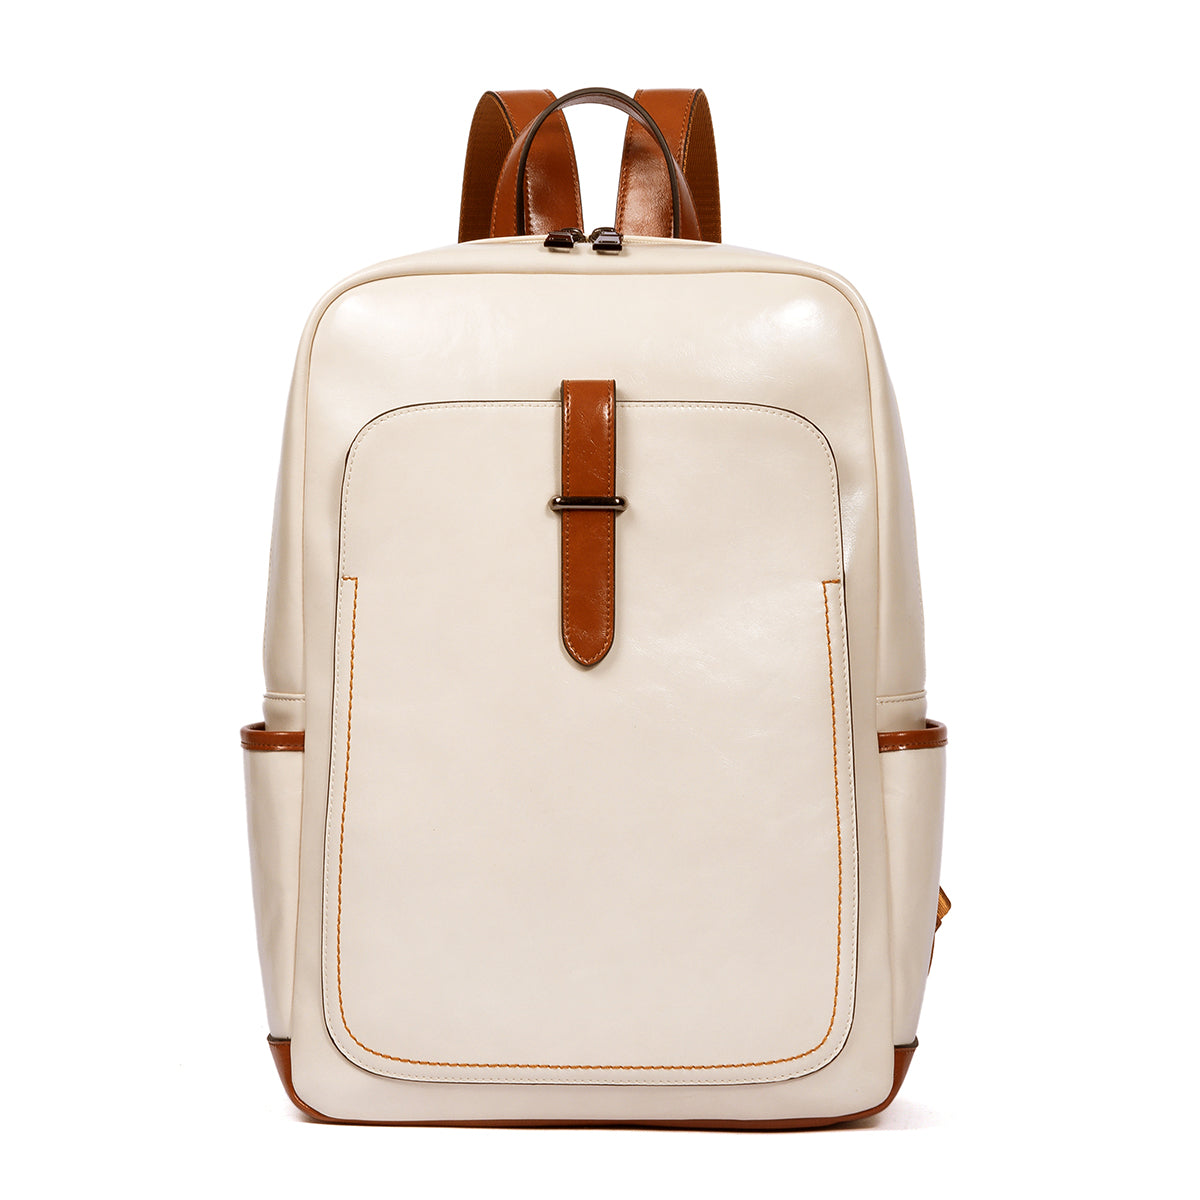 CLUCI Leather 15.6 inch Laptop Backpack Purse for Women Stylish Laptop Bag  Work Computer Backpack Casual Daypack Off-white with Brown